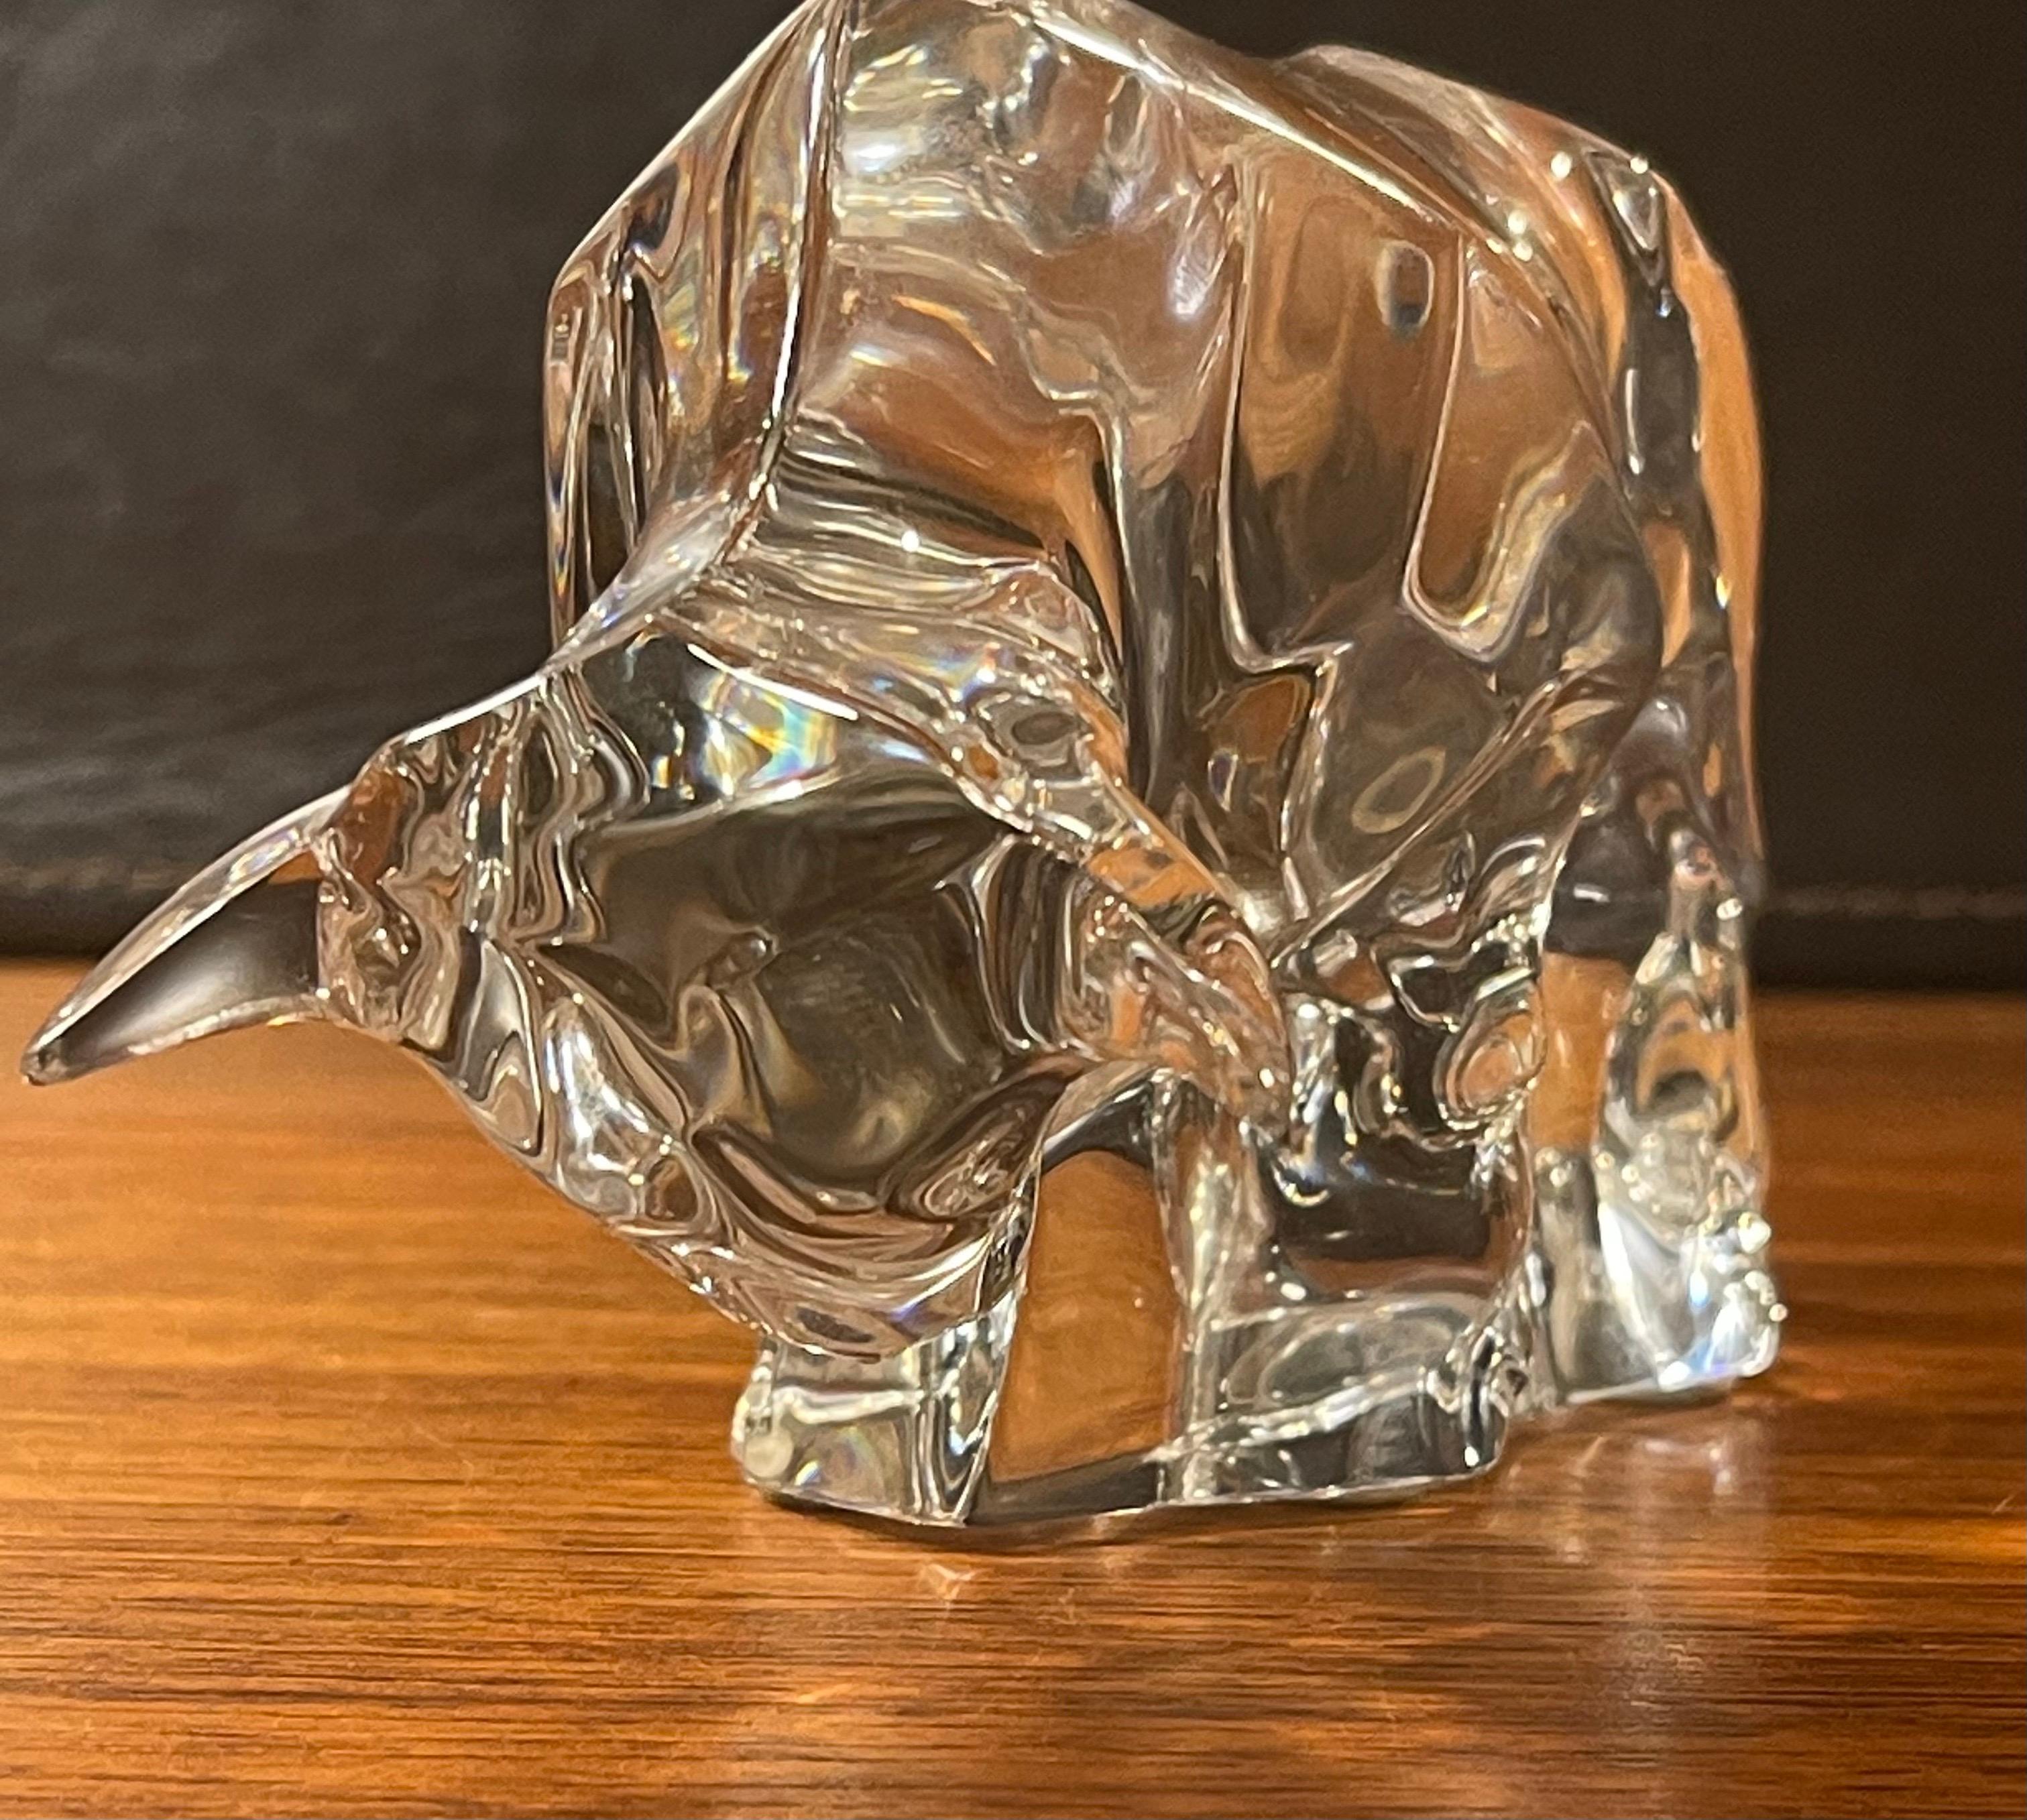 Gorgeous stylized crystal charging bull sculpture by Baccarat, circa 1990s. The piece is in excellent condition with no visible imperfections and has great clarity. Signed on the lower right, the piece measures 6.5